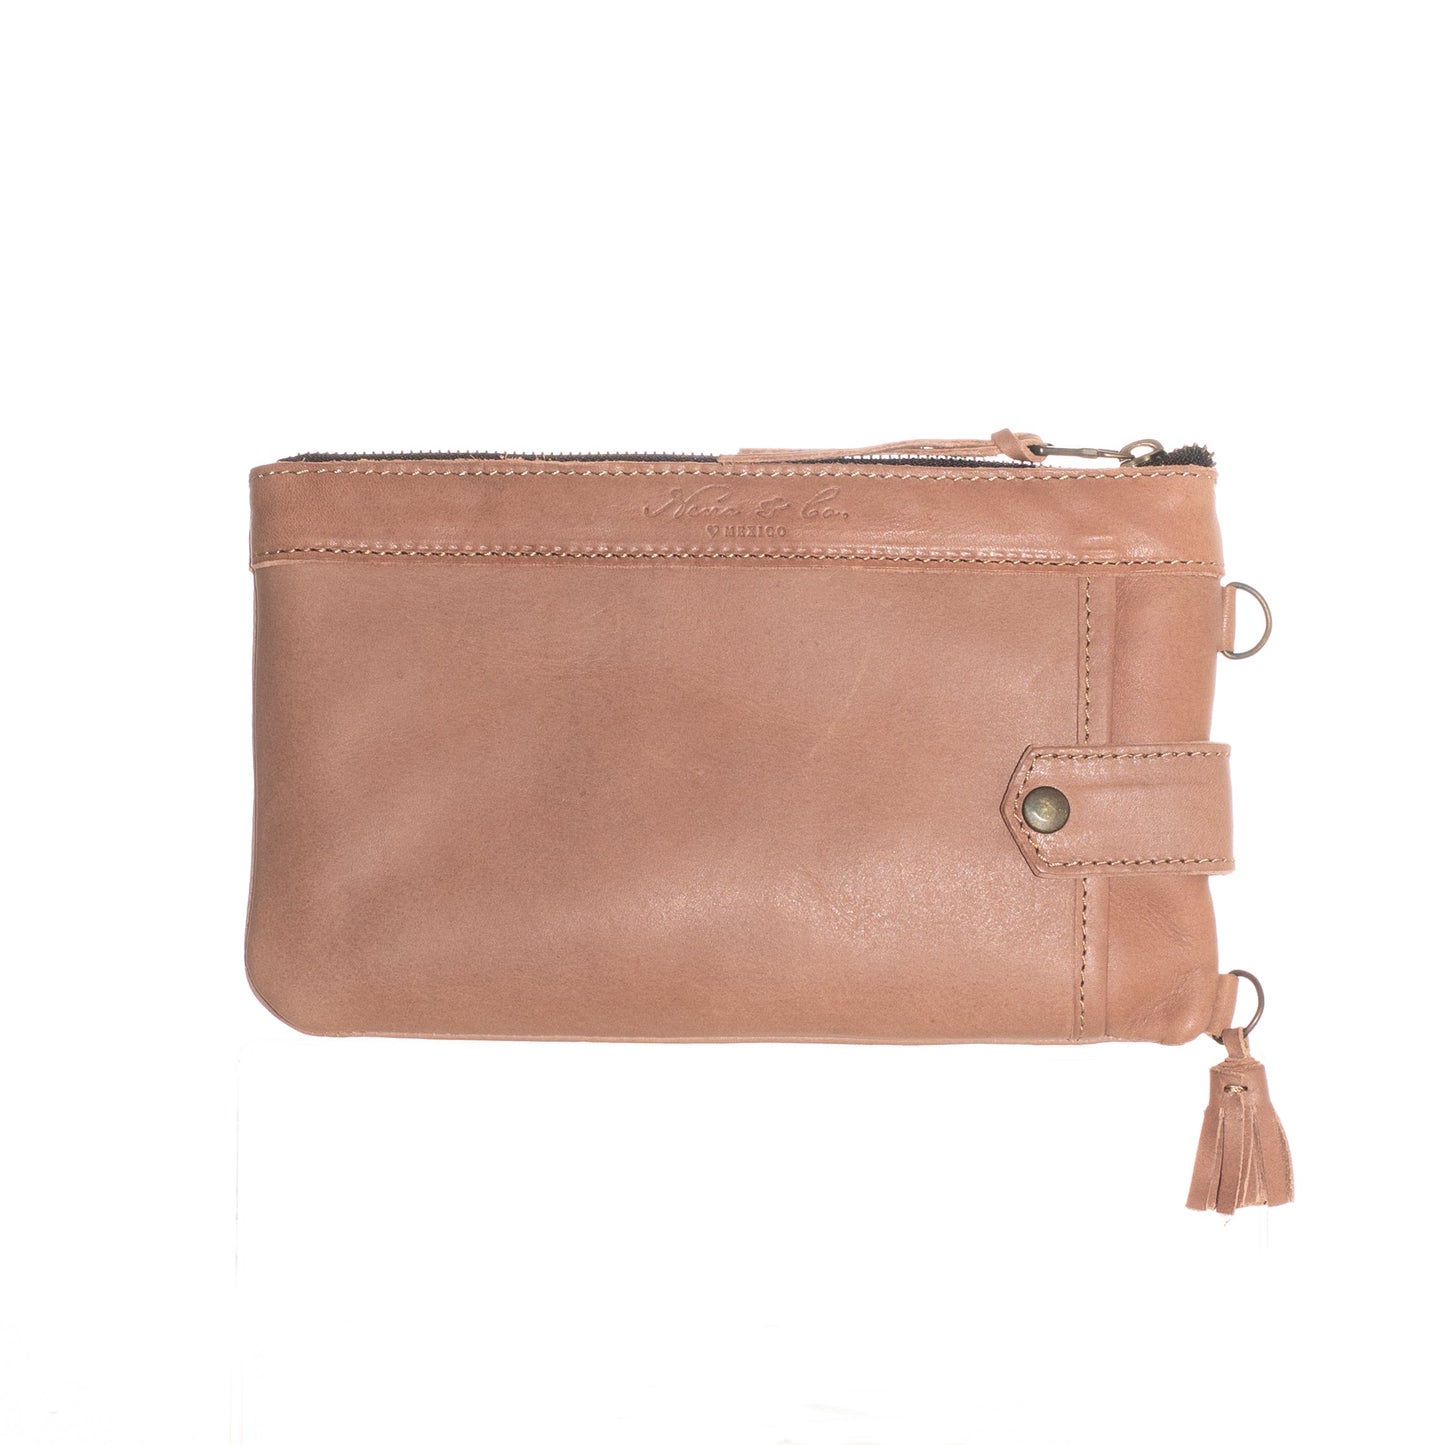 EVERYTHING CLUTCH - MEXICO COLLECTION - FULL LEATHER - ROSÉ LEATHER